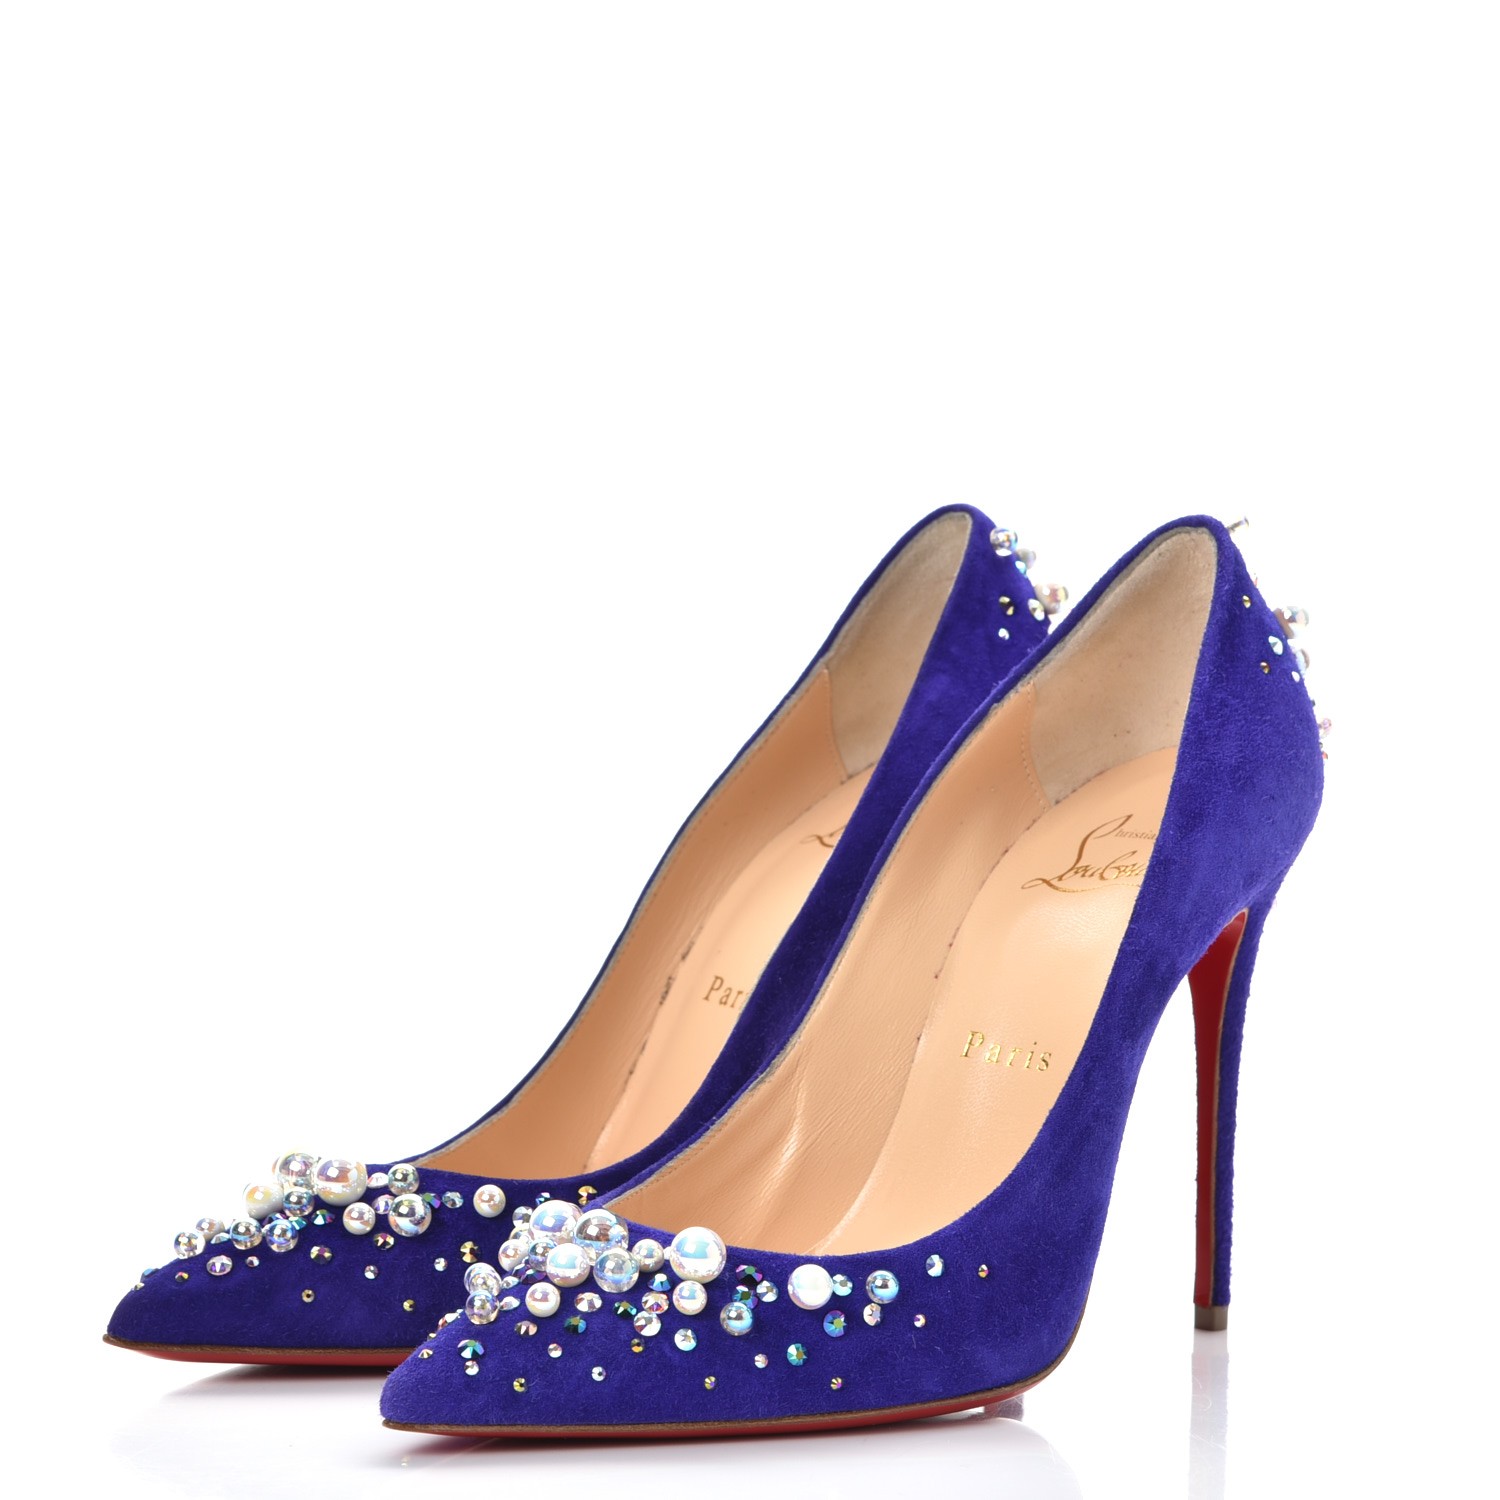 CHRISTIAN LOUBOUTIN Suede Candidate 100 Pumps 37 Purple 240760 ...